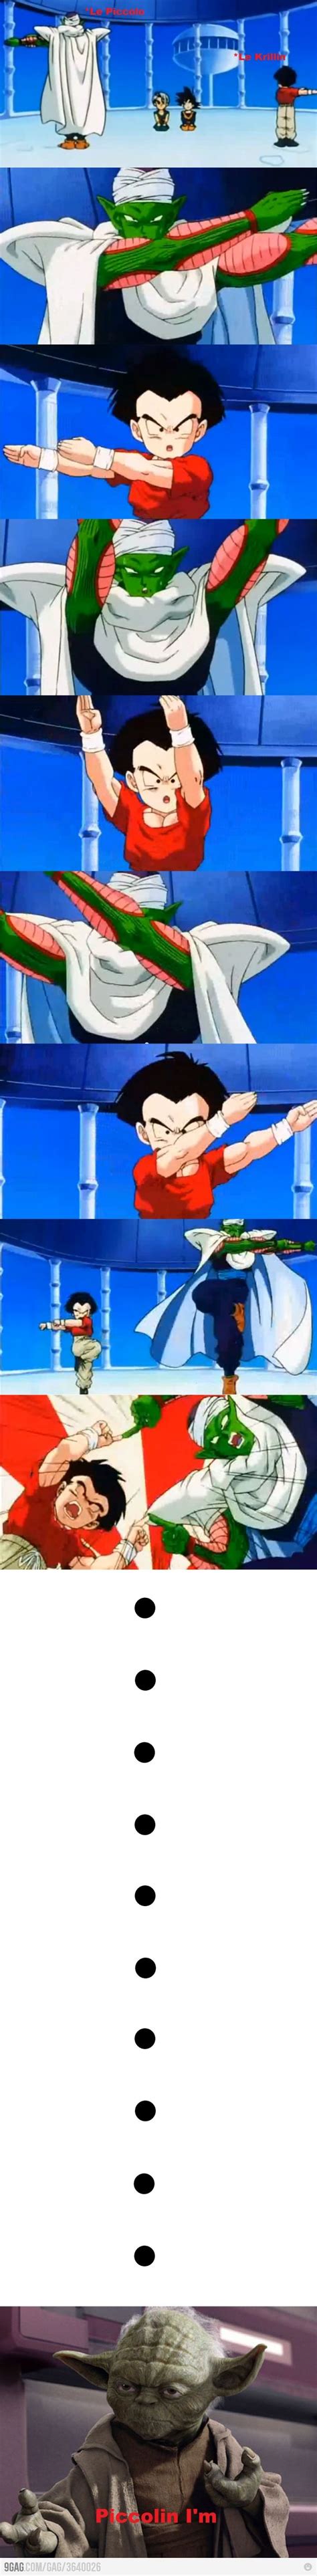 Dragon ball's fusion is the fusions used by characters in the manga and anime dragon ball. Piccolo & Krillin fusion | Anime funny, Dragon ball z ...